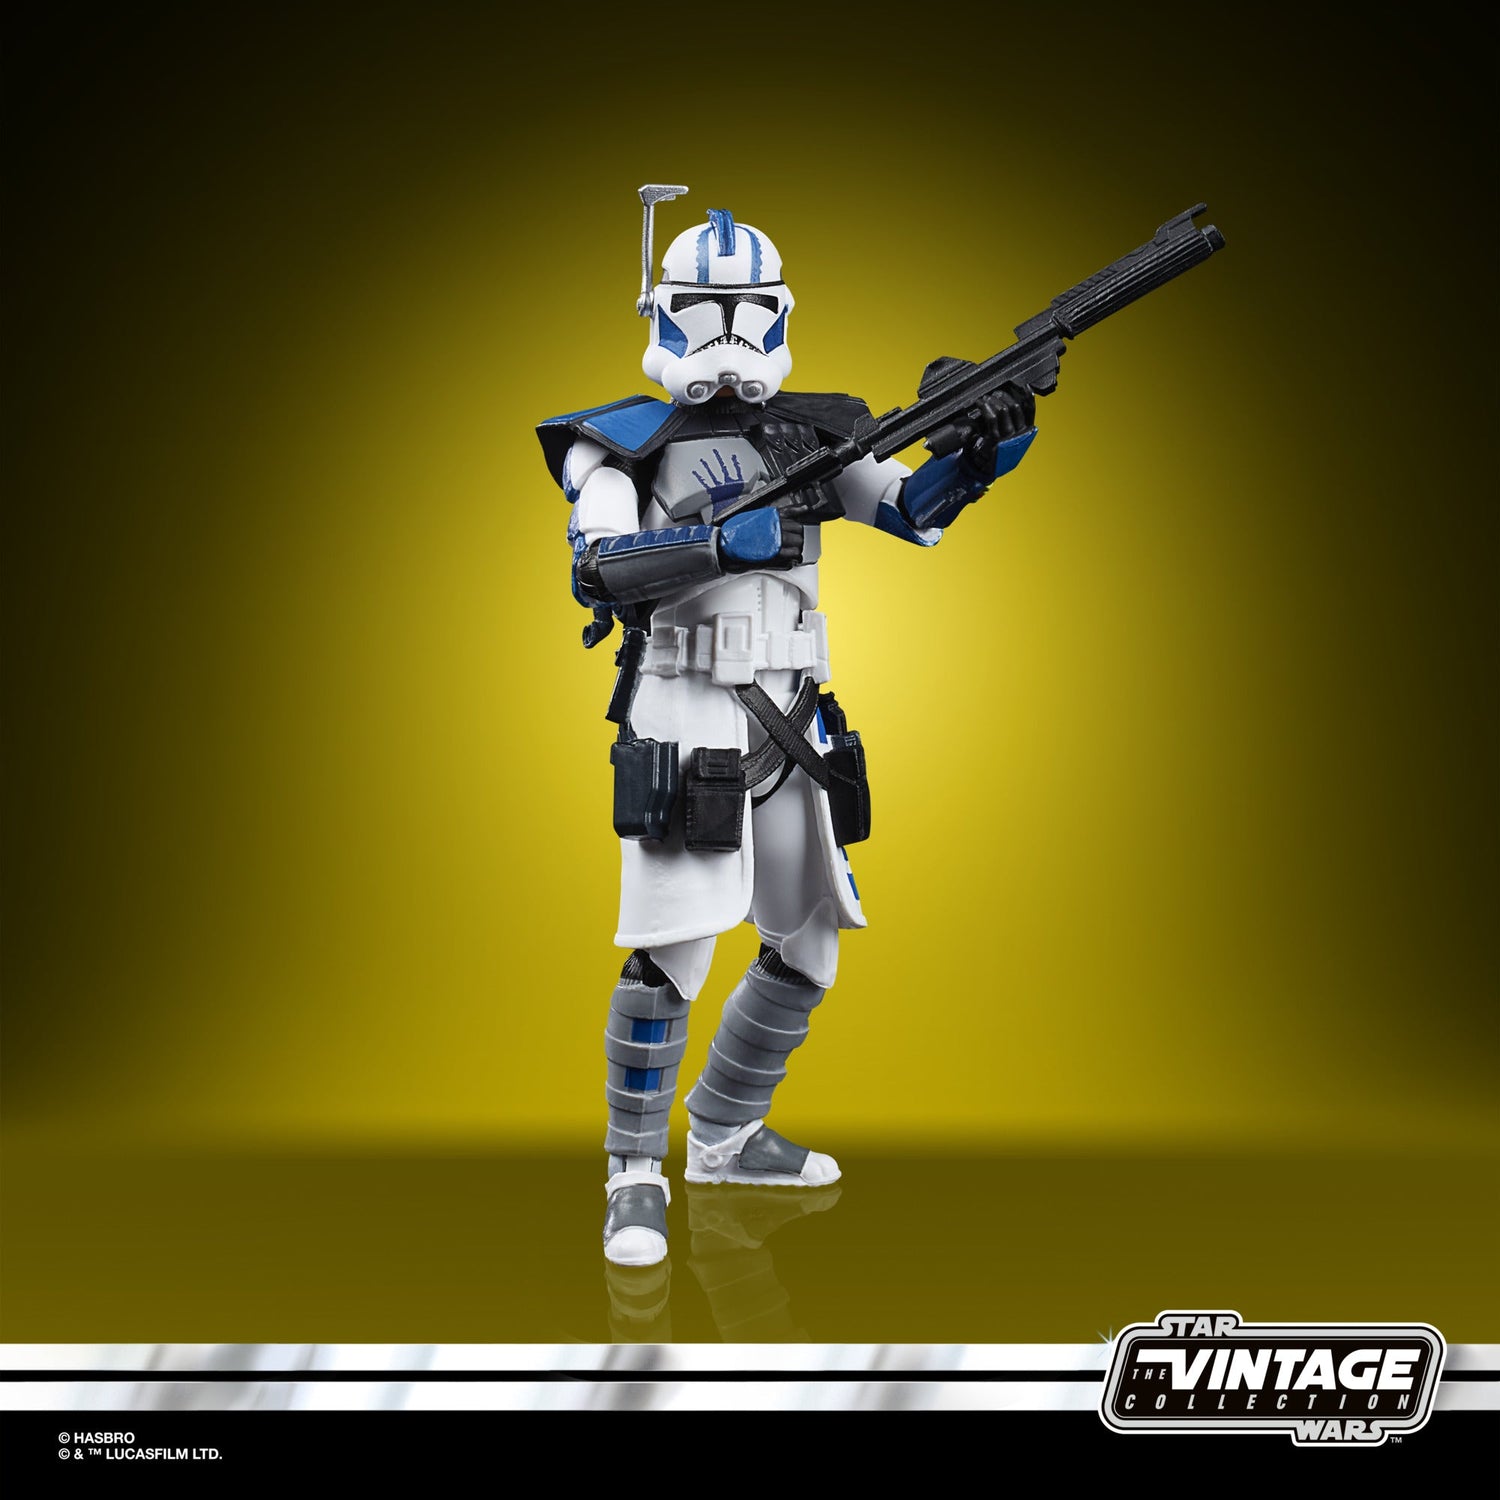 Star Wars The Vintage Collection Star Wars: The Clone Wars 501st Legion ARC Troopers